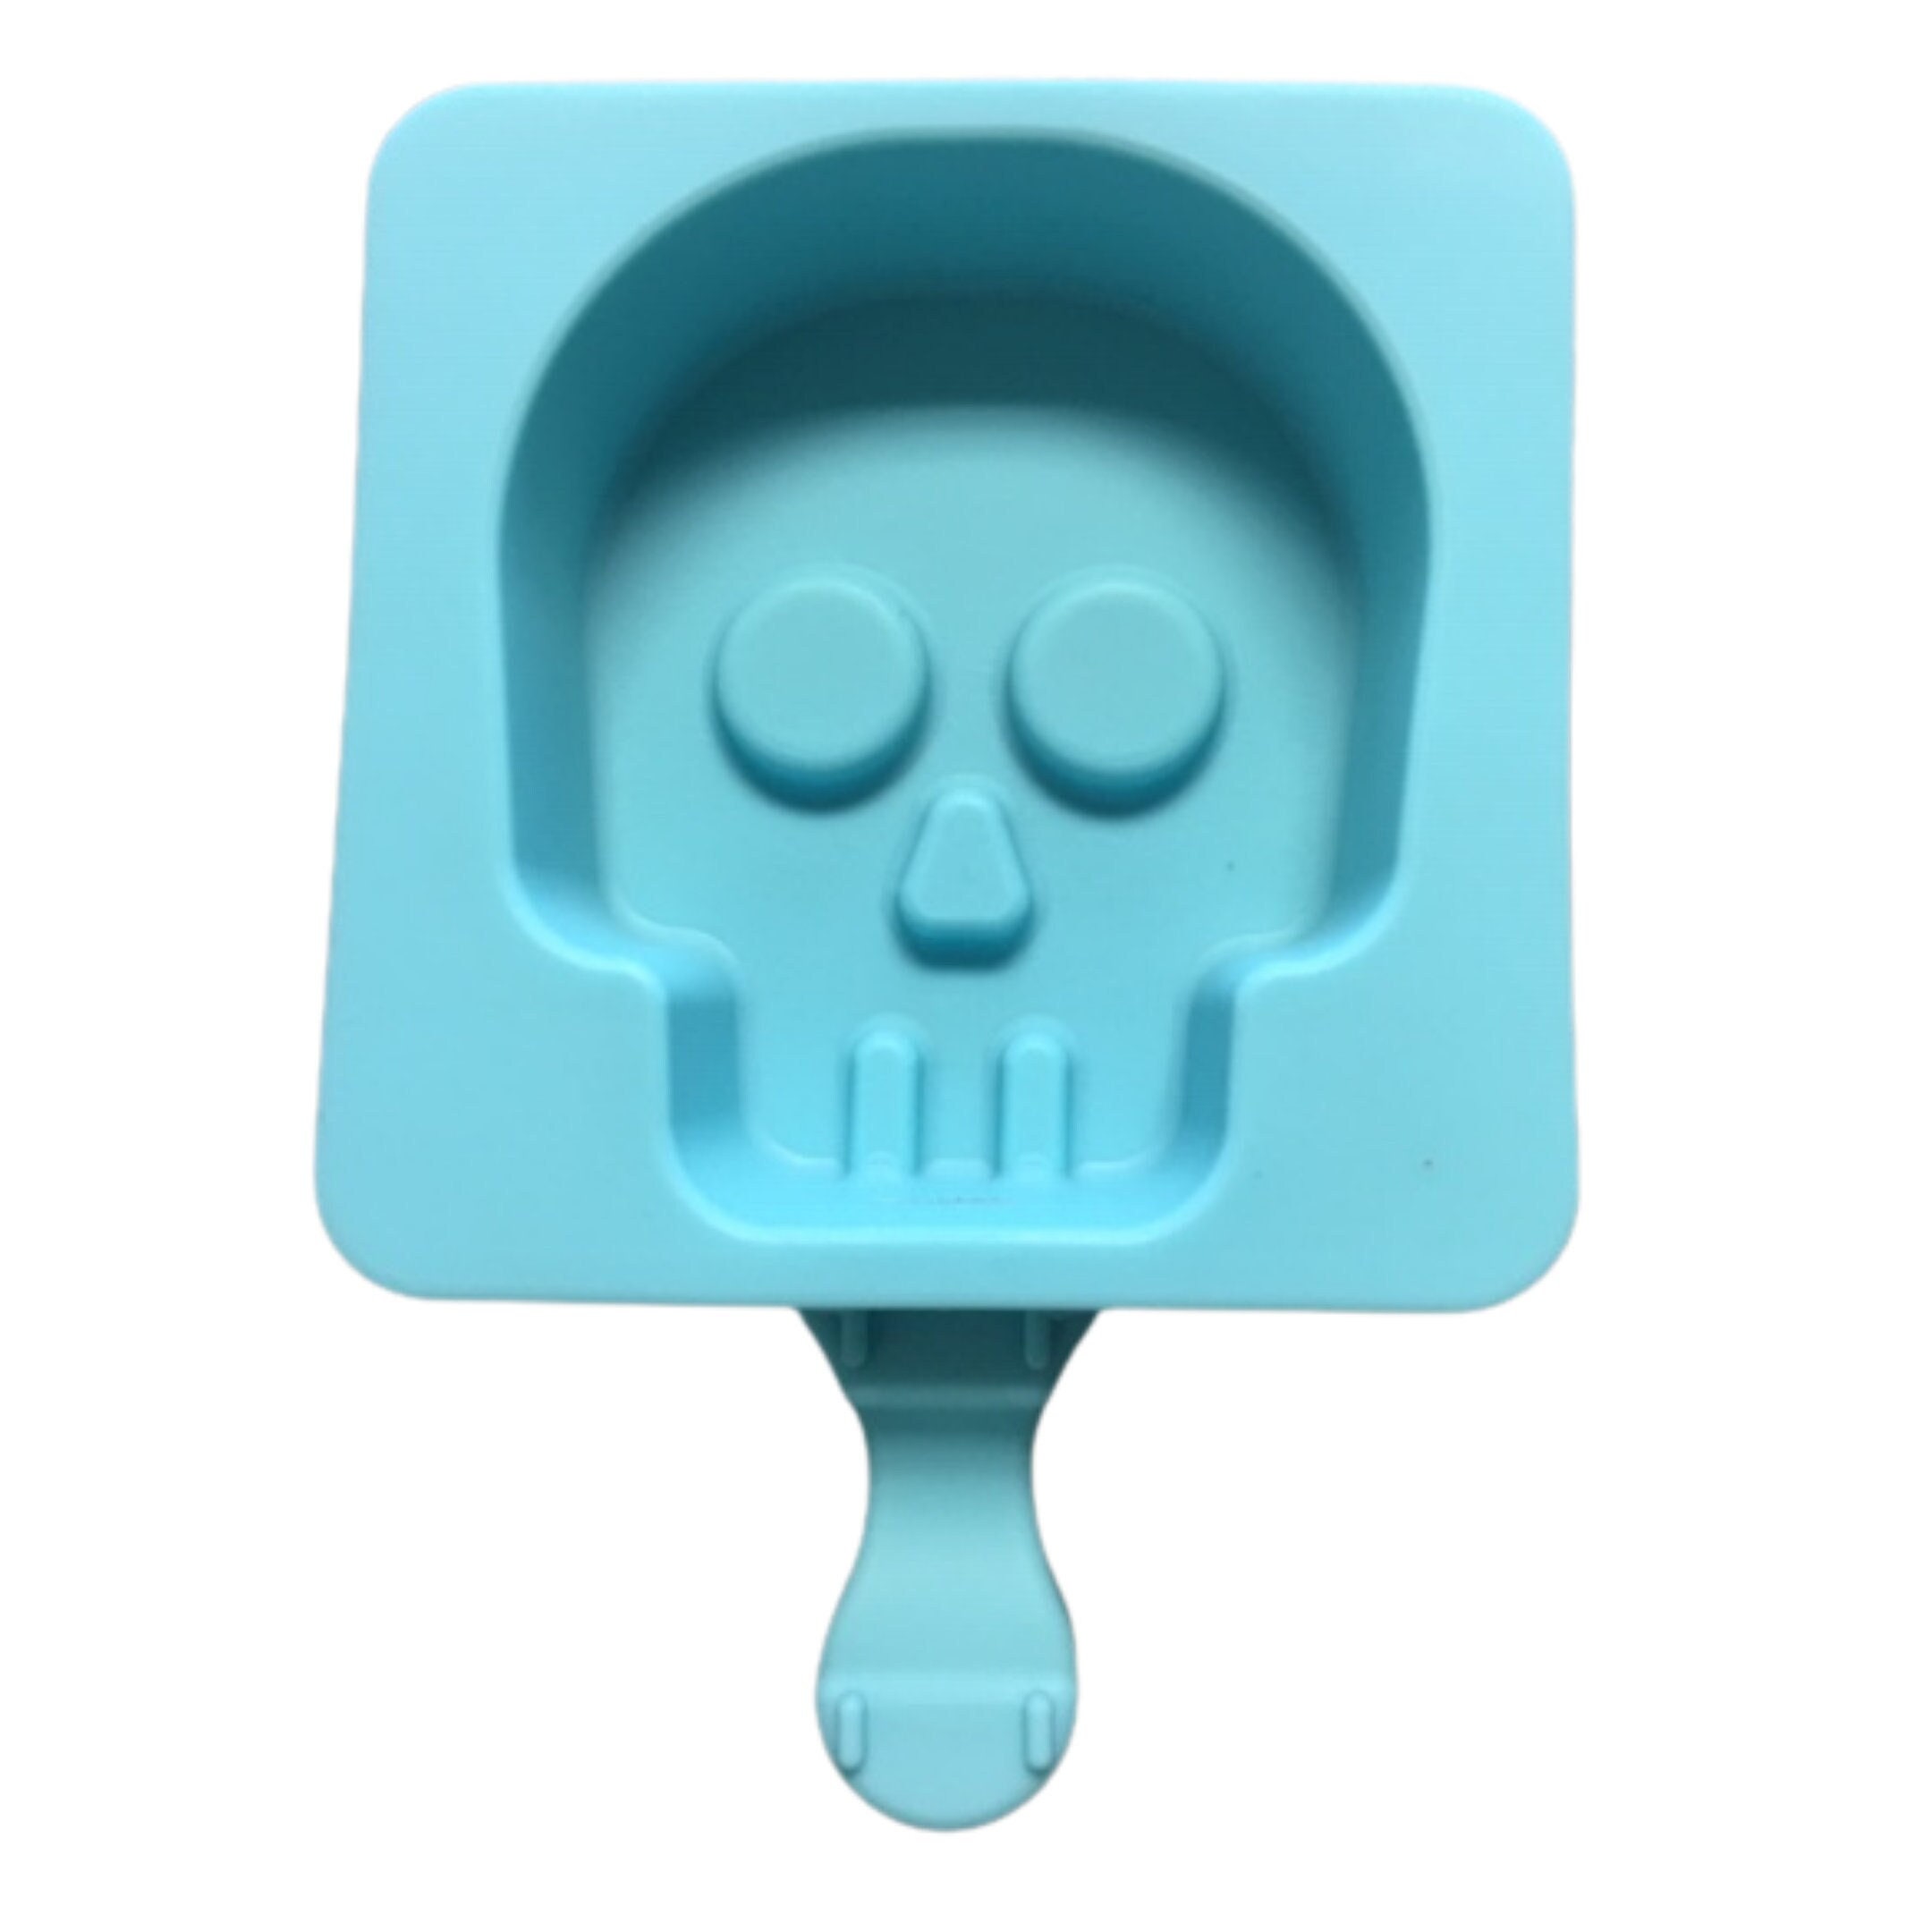 SKULL CAKESICLE MOLD, Halloween Popsicle Mold, Ice cream Mold, Silicone  Baking Molds, Supplies, Creepy Mold, Scary, Fast Shipping, Shapem